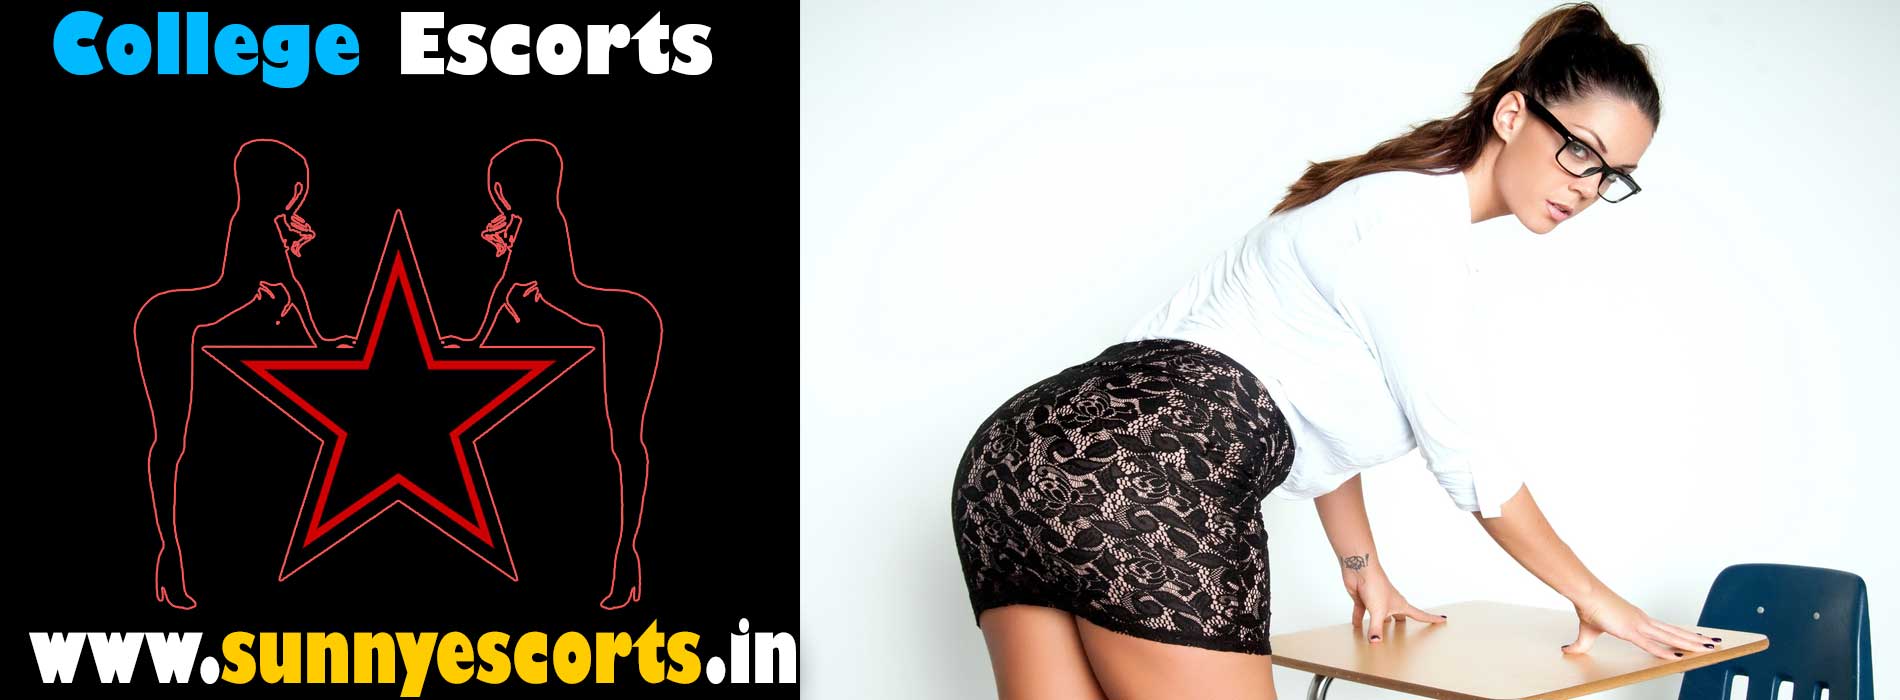 College Call Girls in Bangalore